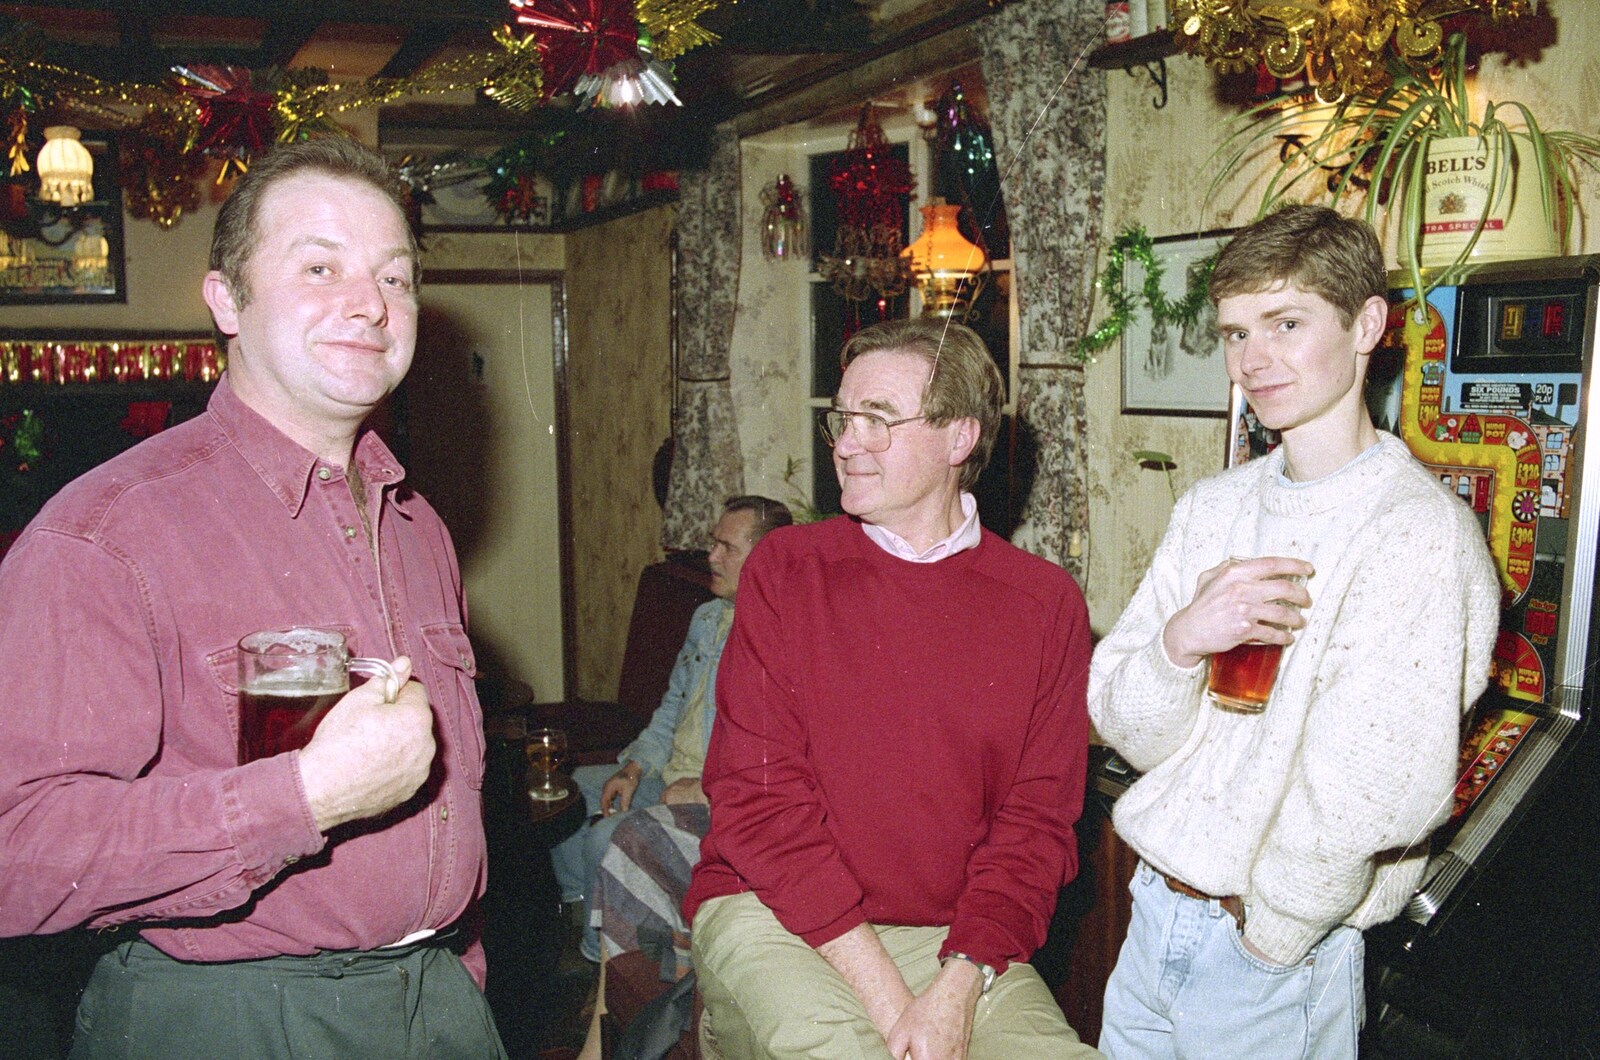 Ian C, Peter Allen and Ninja M from New Year's Eve in the Swan Inn, Brome, Suffolk - 31st December 1995